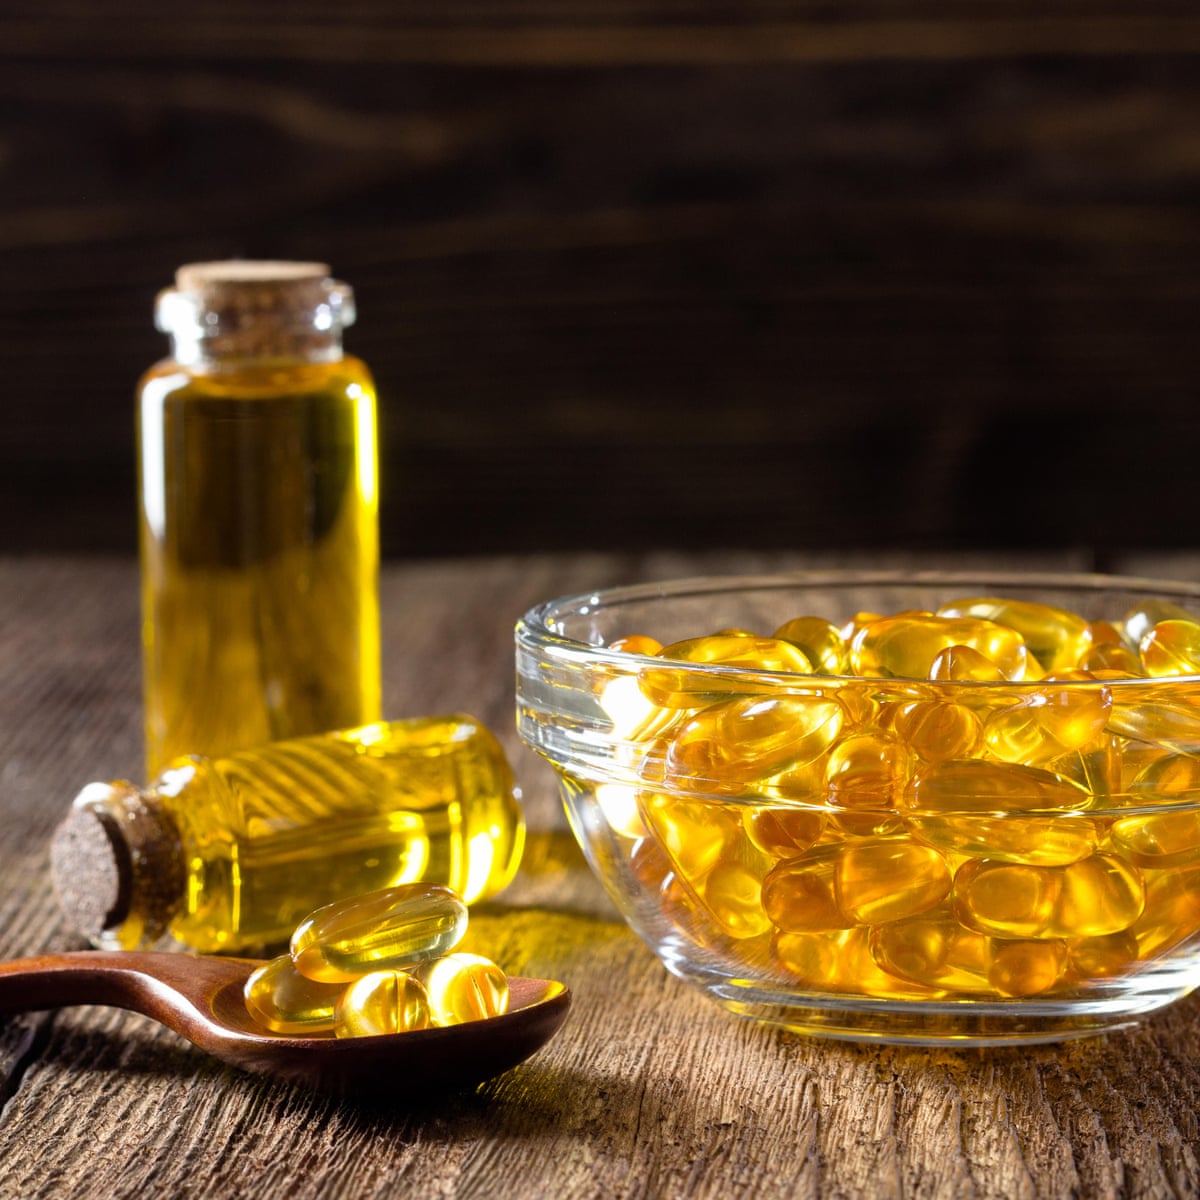 It's mind-boggling': the hidden cost of our obsession with fish oil pills, Fish  oil